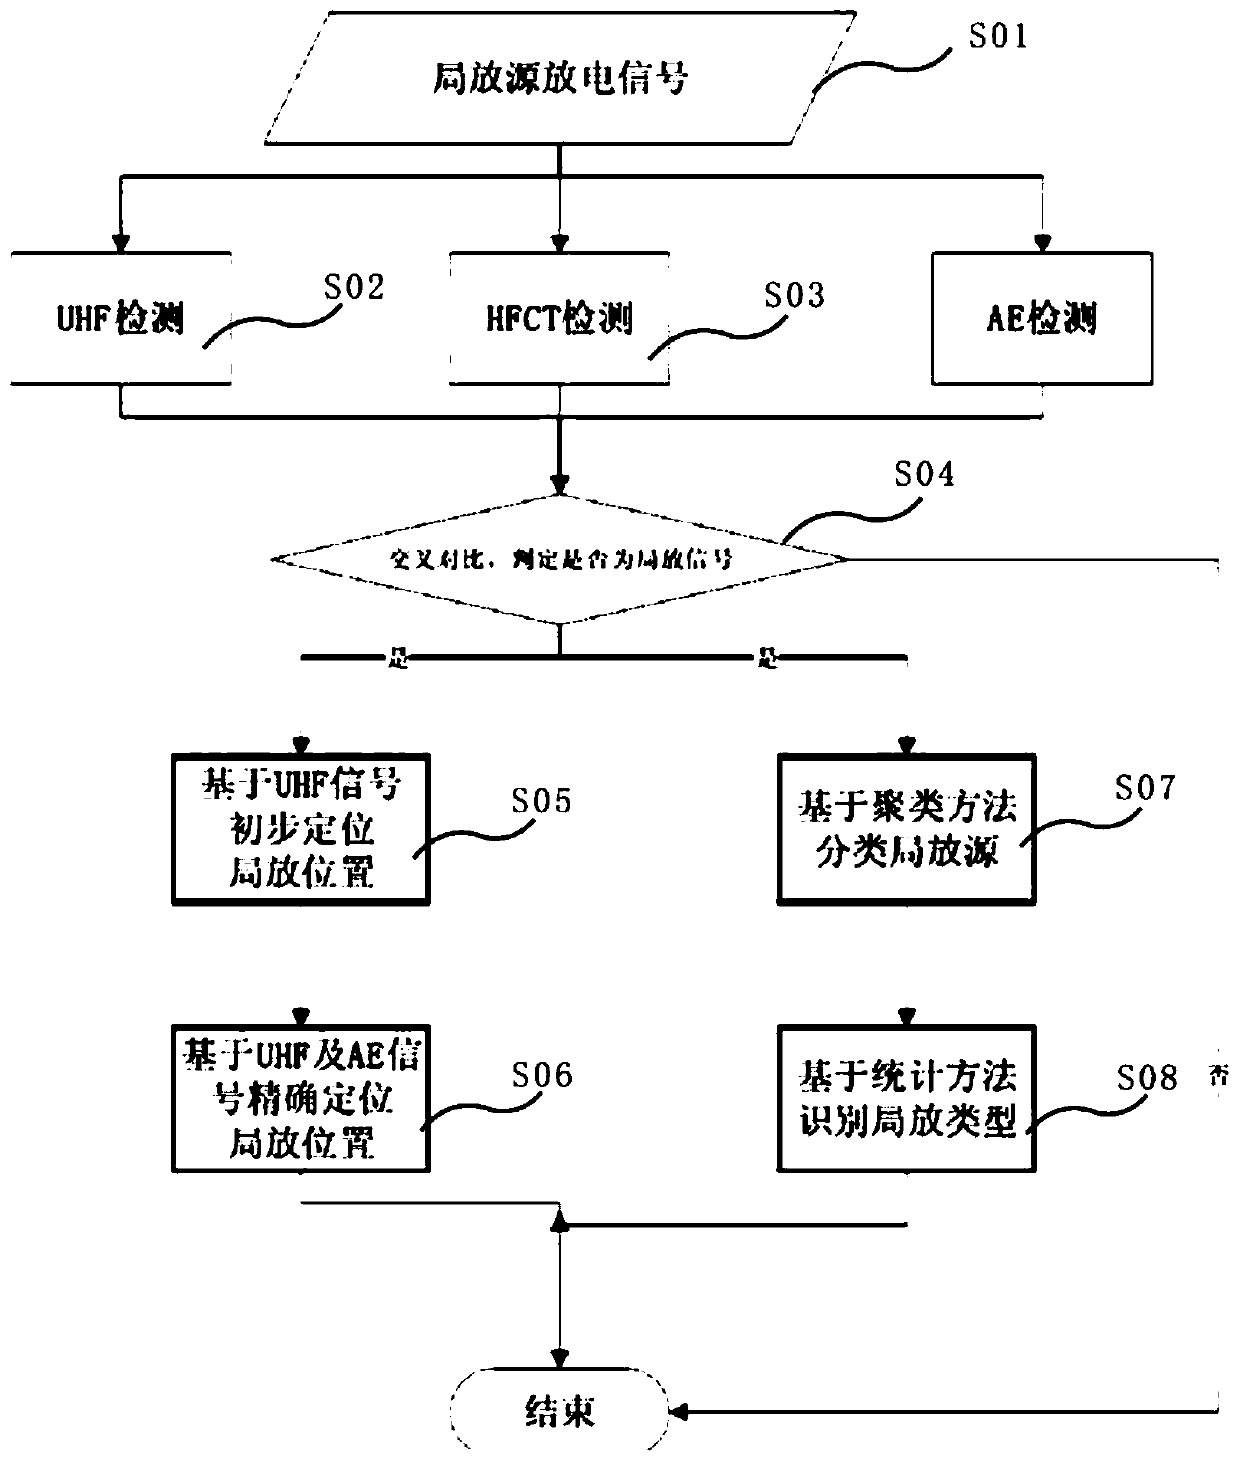 Transformer bushing insulation partial discharge monitoring system and method